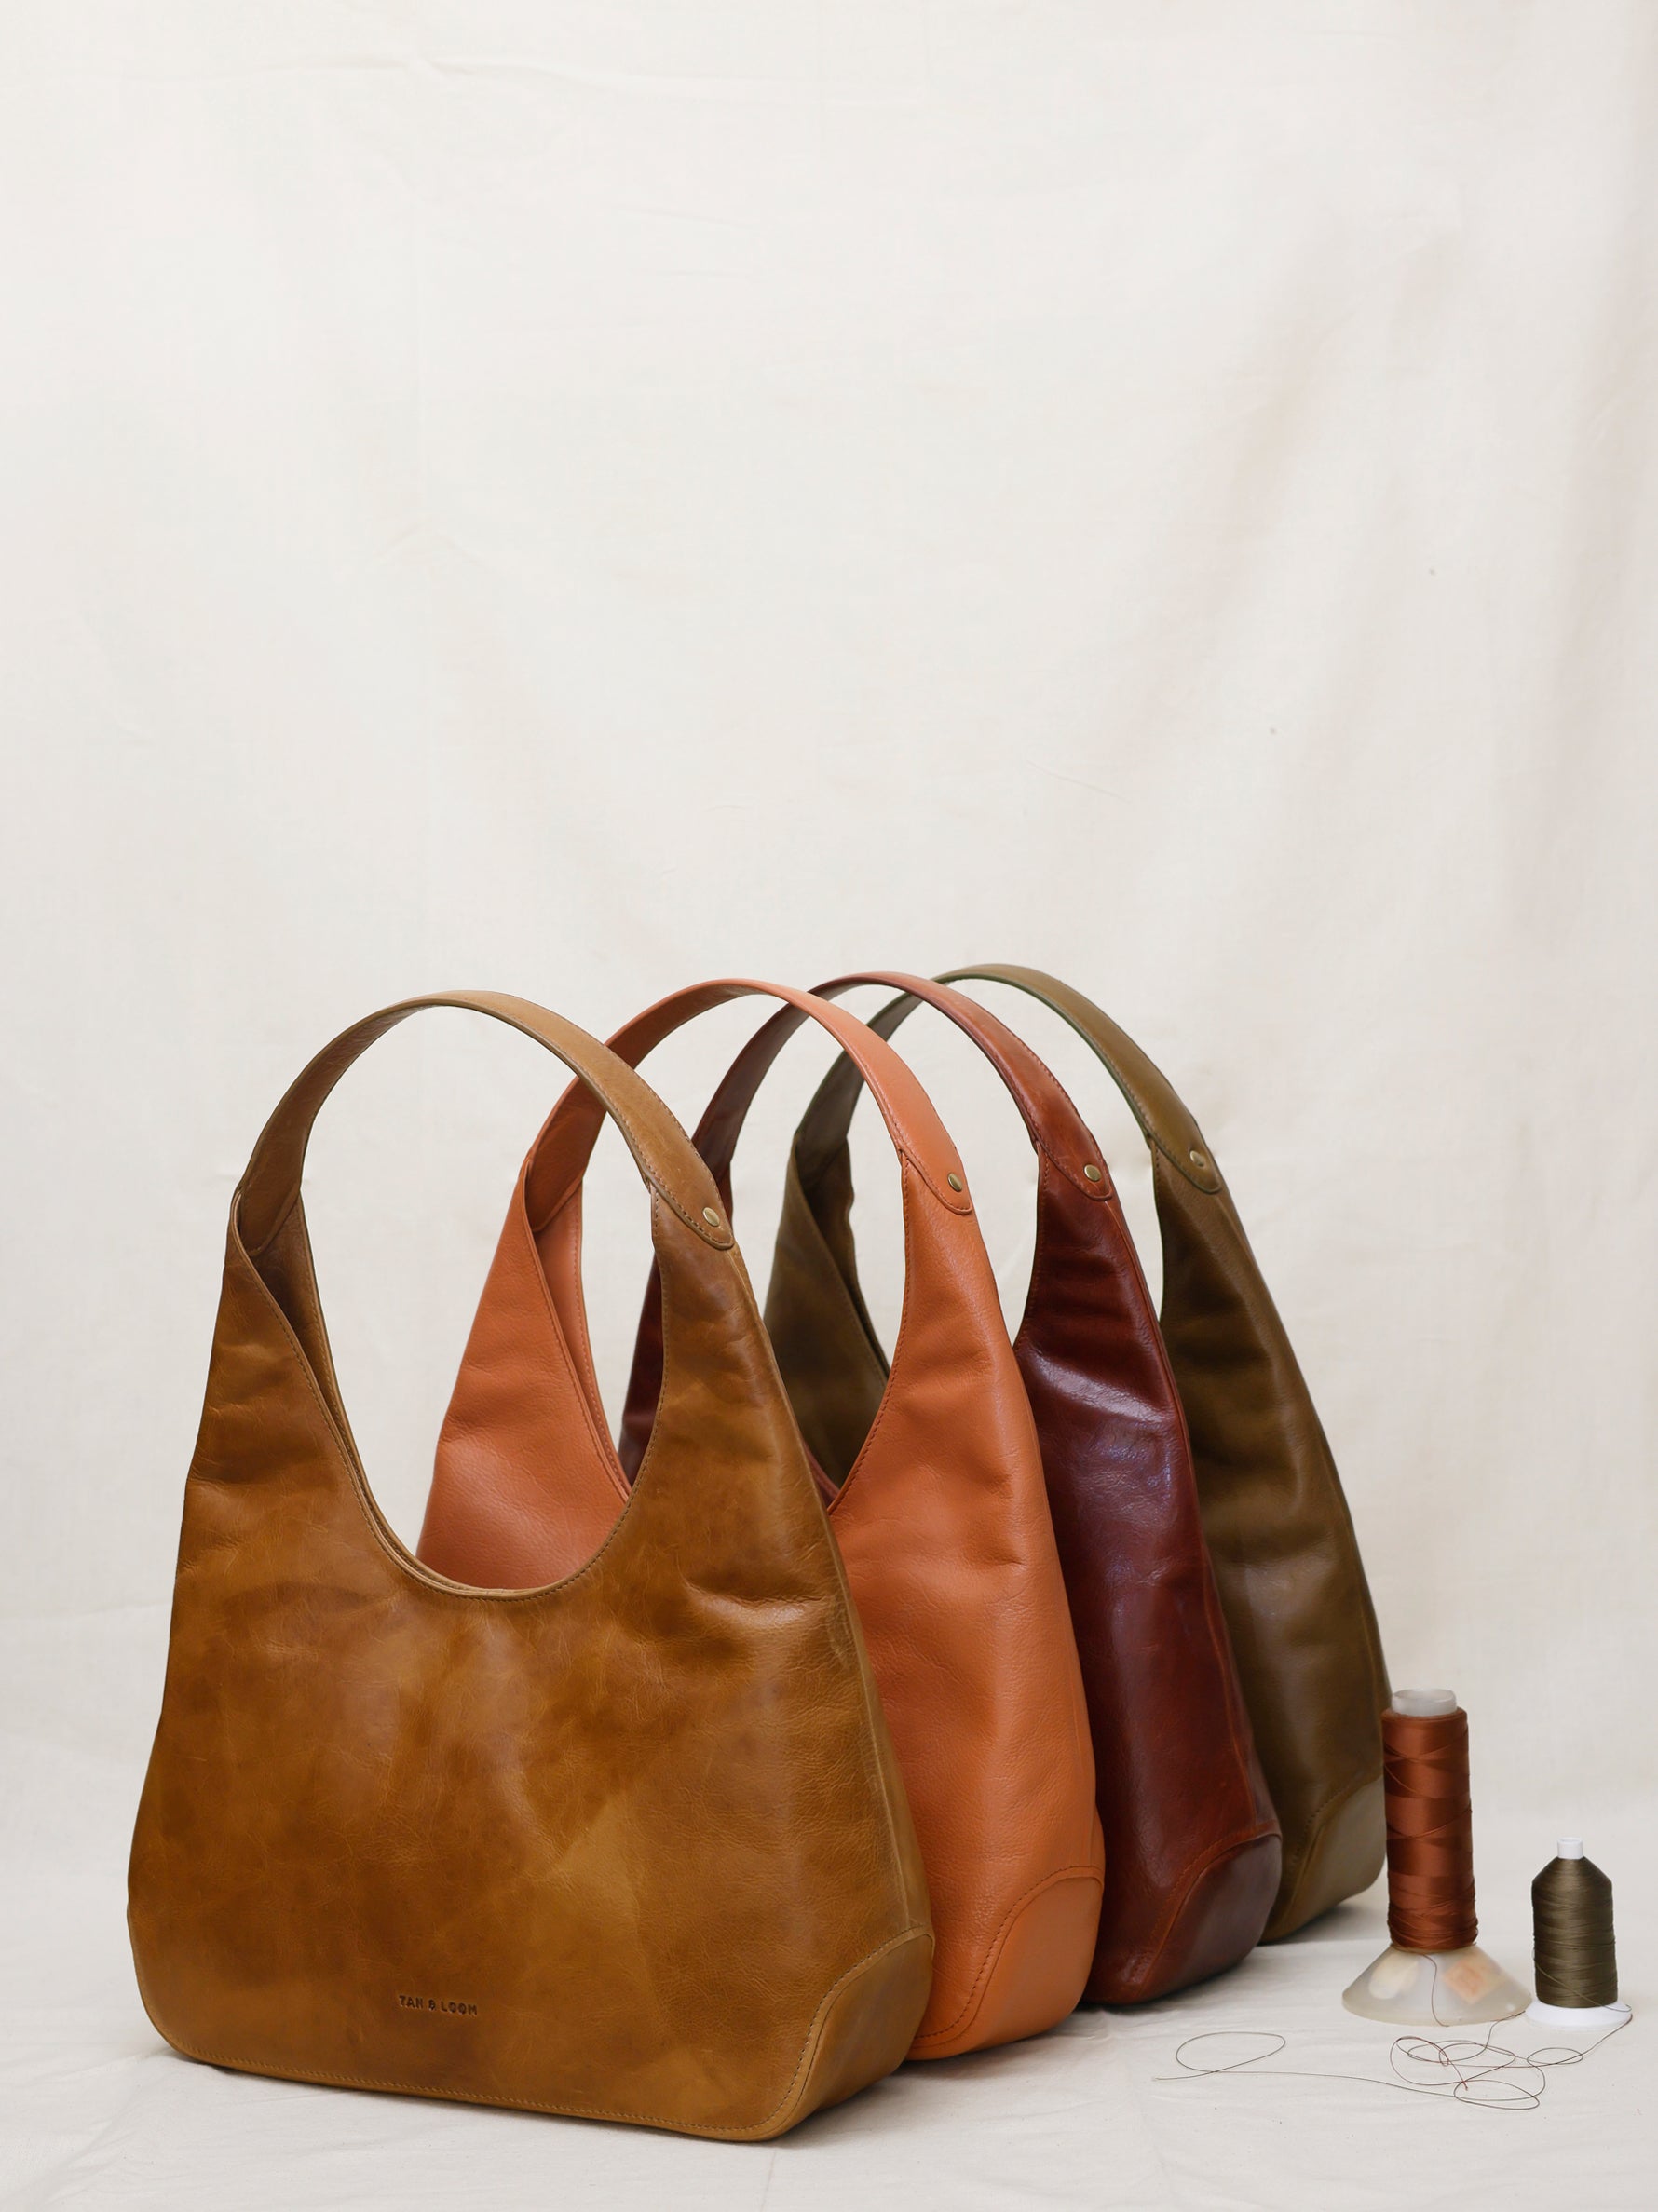 Handcrafted Genuine Vegetable Tanned Leather Hippie's Hobo Tuscany Tan for Women Tan & Loom